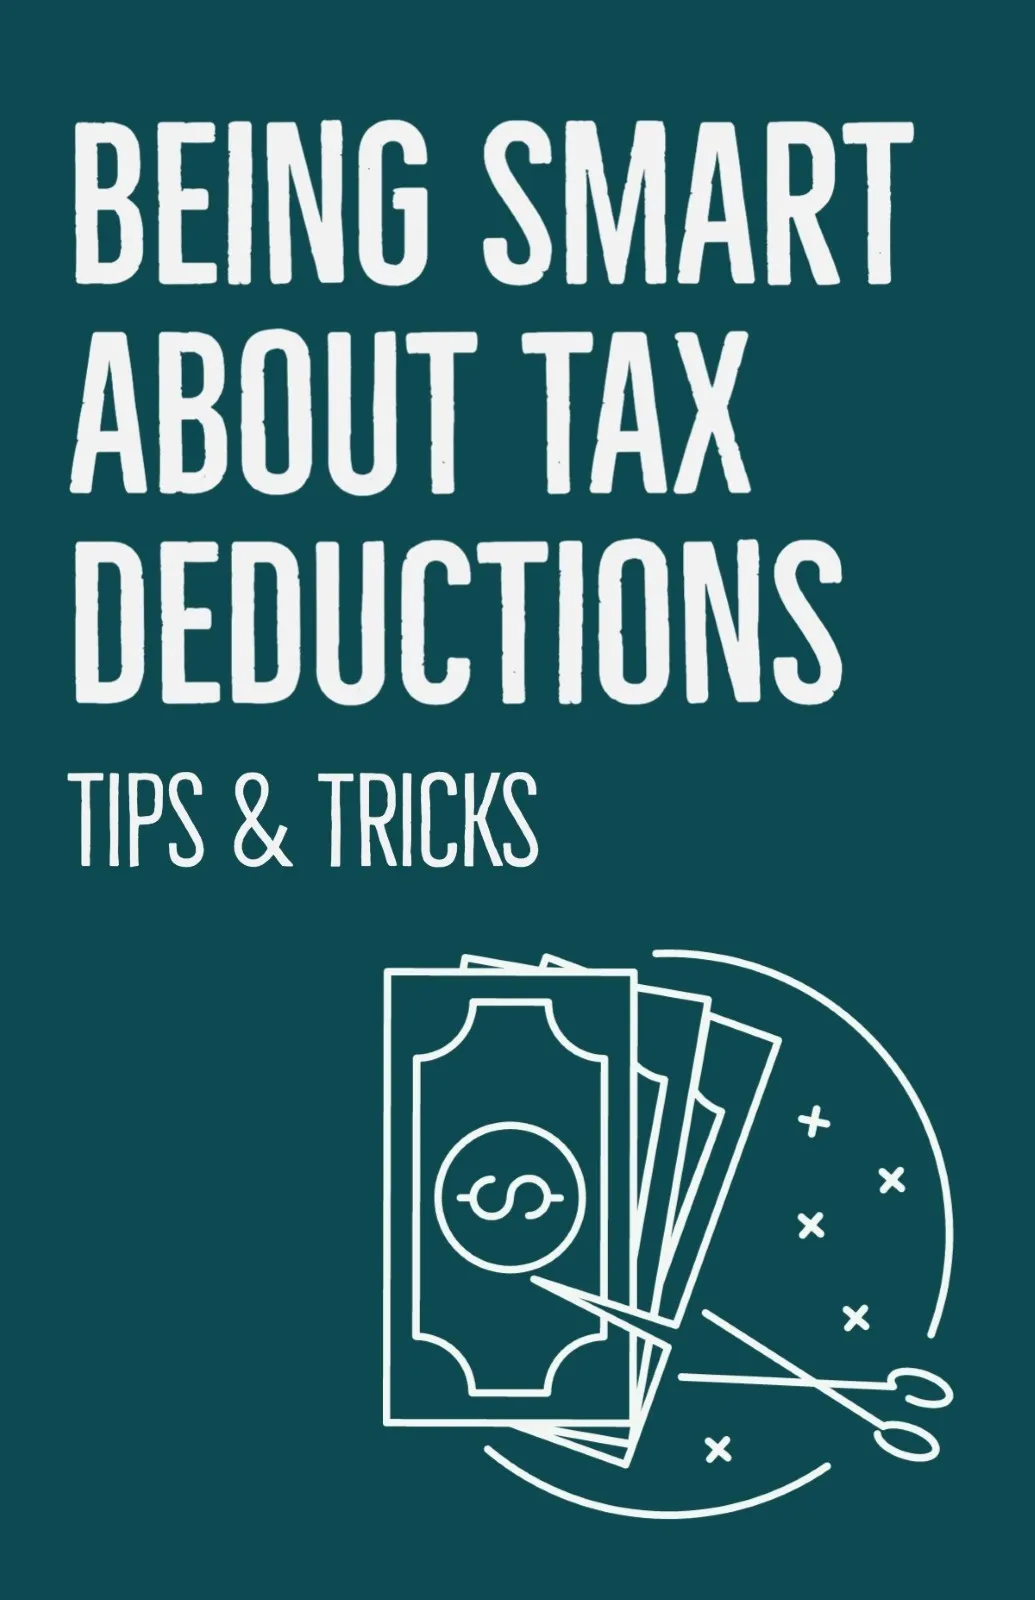 Blue Tax Reductions Tips & Tricks Poster